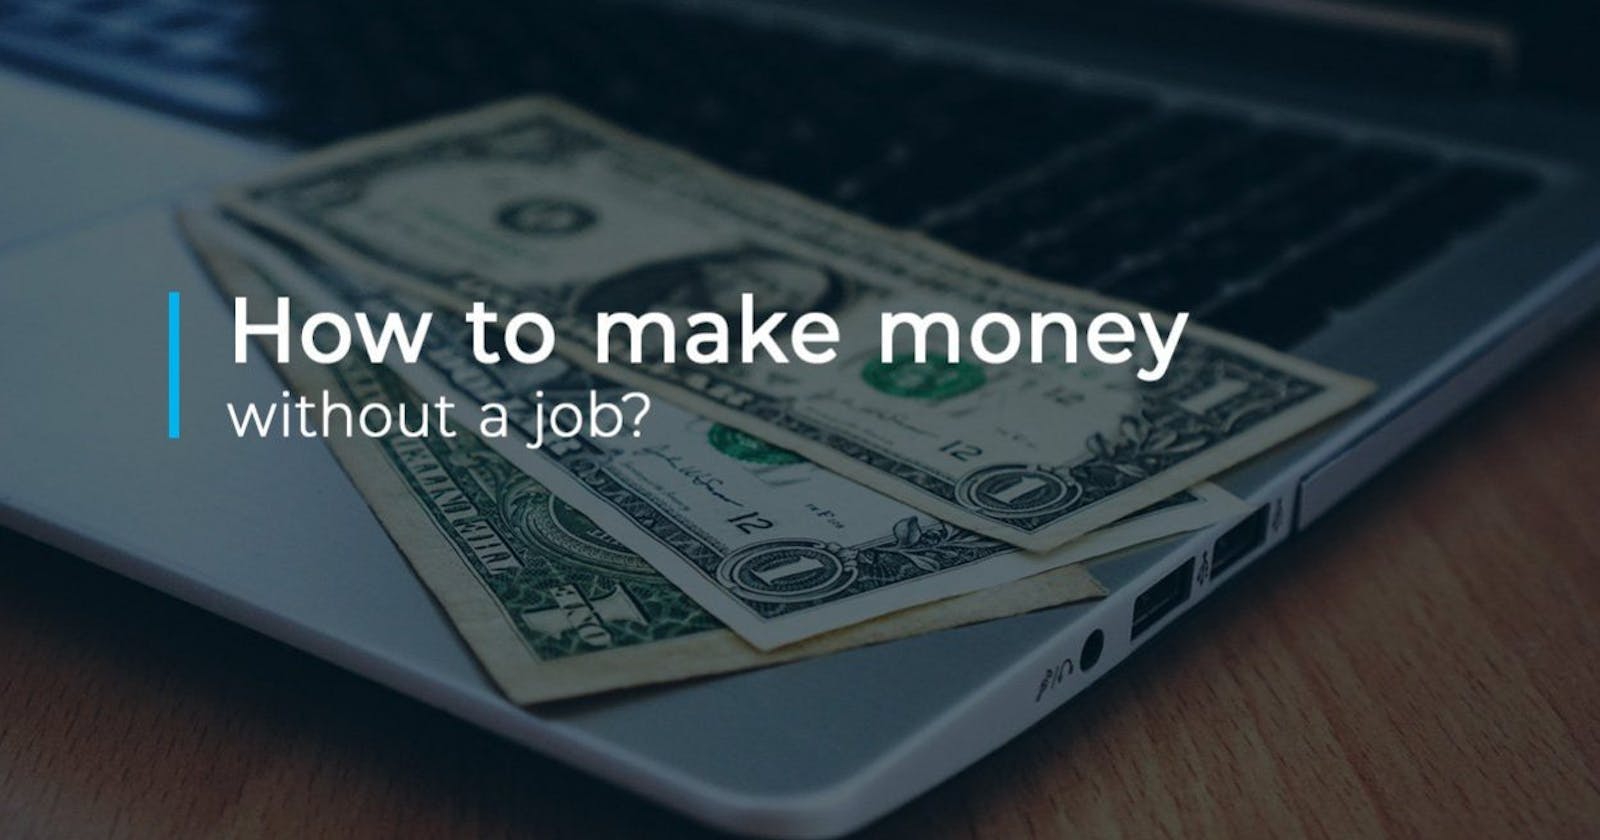 How to make money without a job?